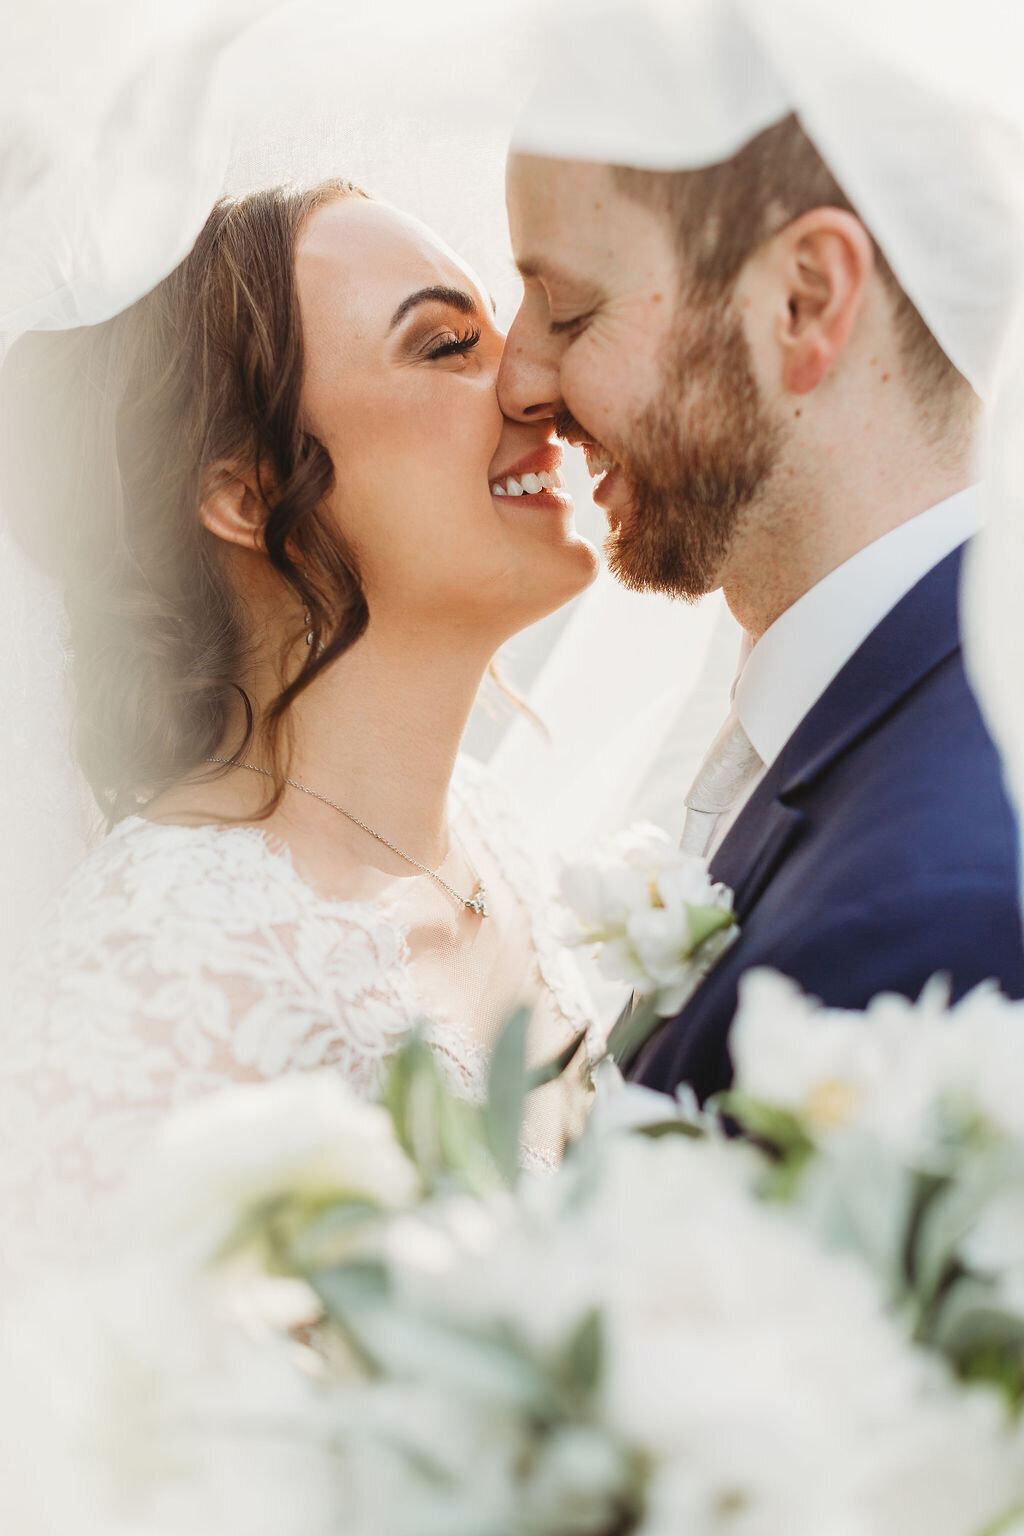 bride and groom on their wedding day romantic portrait light and airy burgundy flowers gray suit